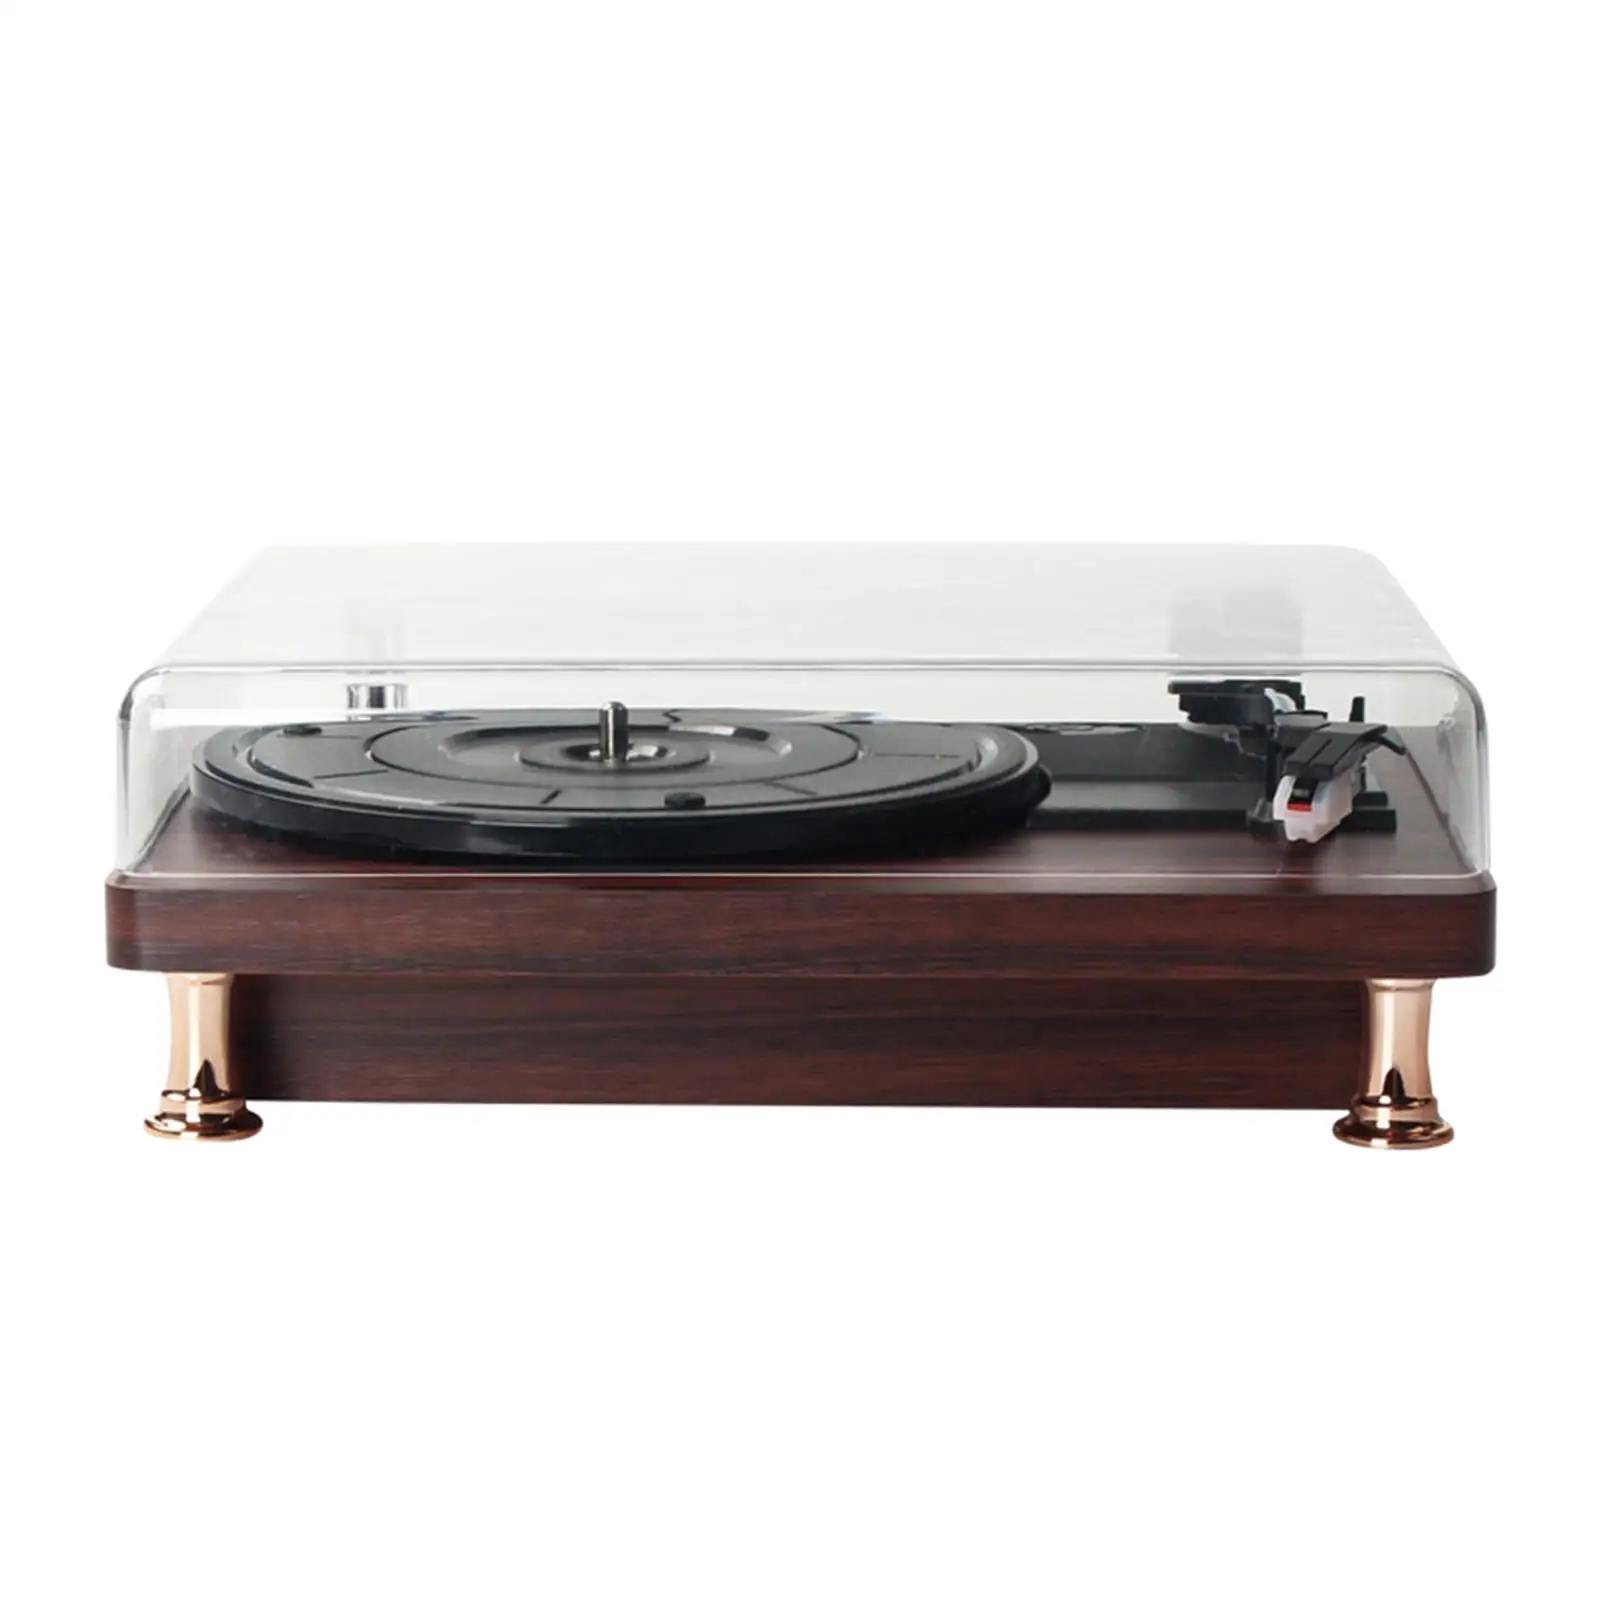 Vinyl Record Player Turntable Music Player 33/45/78 RPM for Home Decoration Souvenir Collection